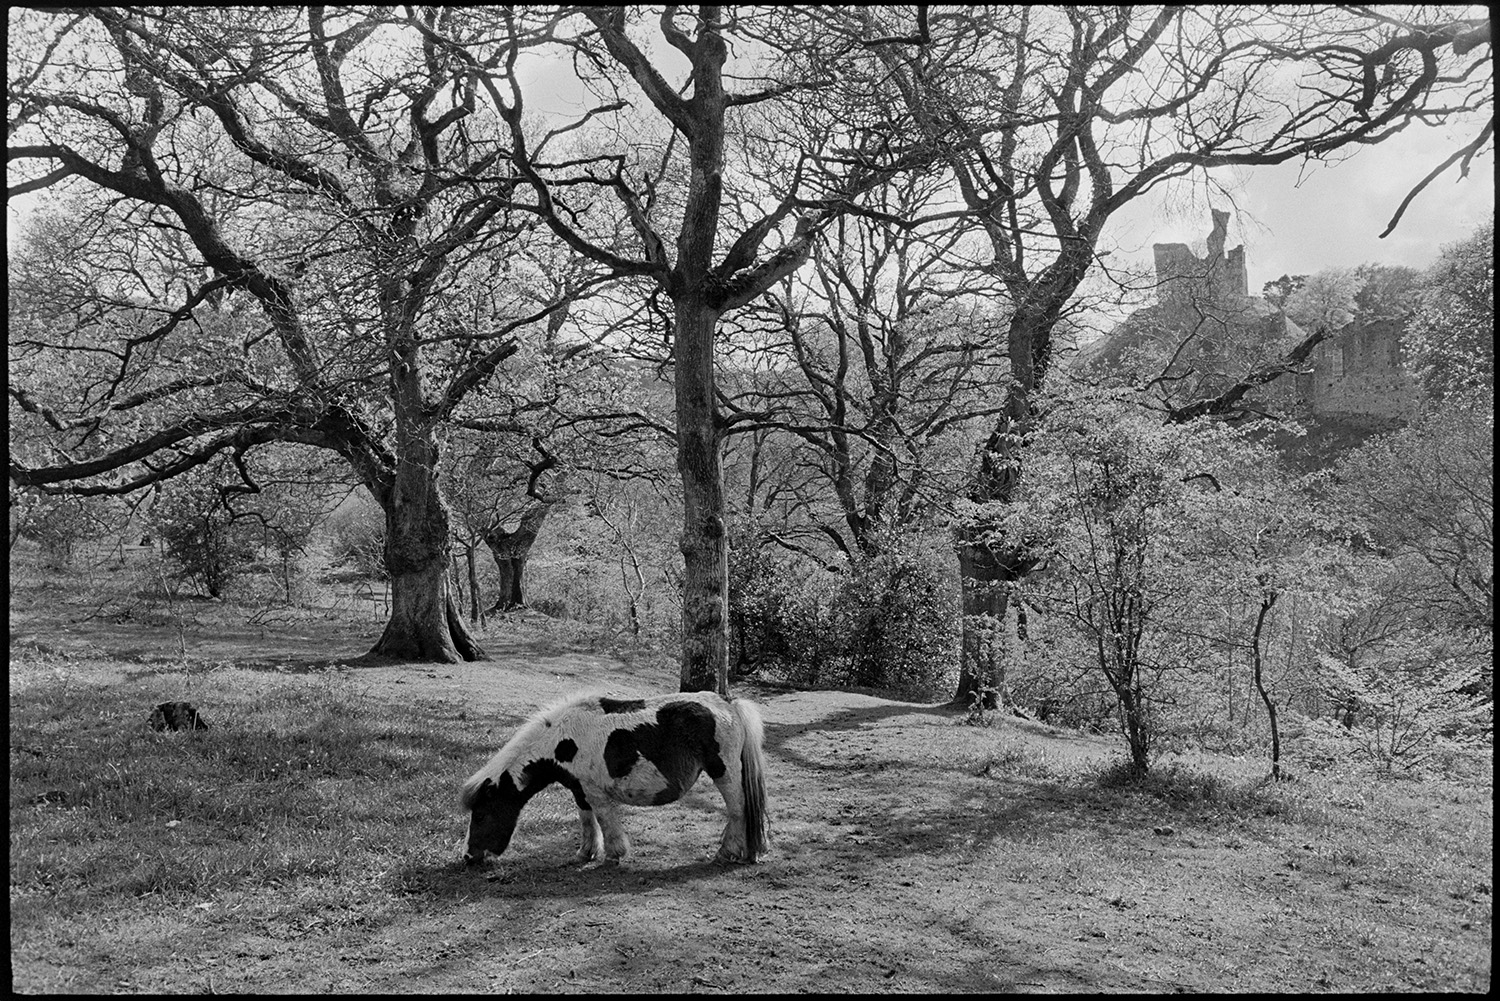 Walkers in castle deer park, pony grazing with castle ruins behind.<br />
[A pony grazing amongst trees on a sunny day at Okehampton Castle. The castle ruins are visible in the background and shadows from the trees falling on the ground by the pony.]